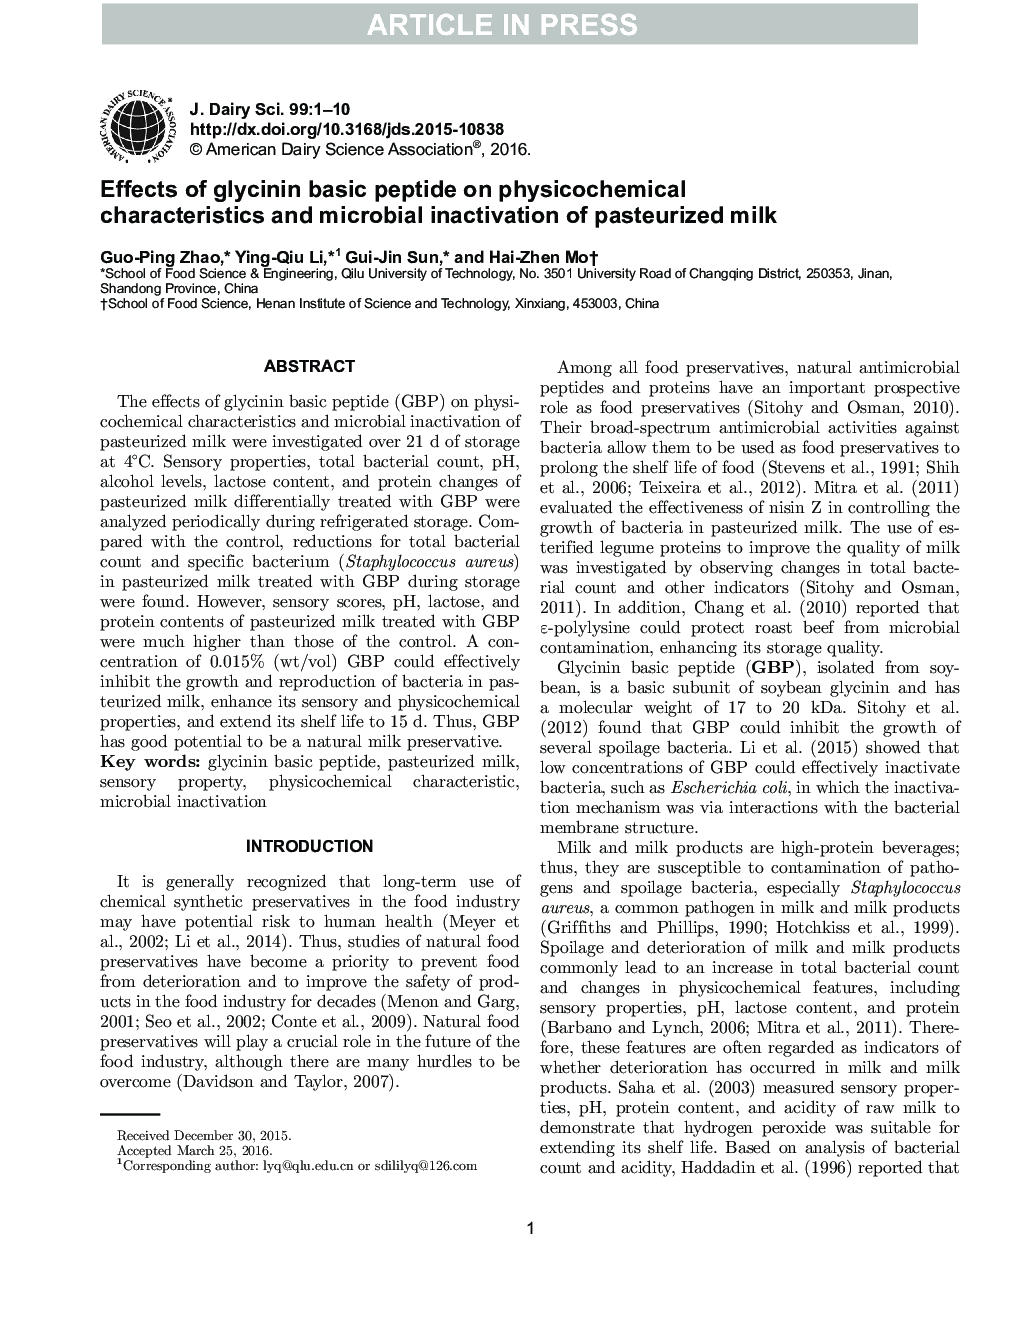 Effects of glycinin basic peptide on physicochemical characteristics and microbial inactivation of pasteurized milk